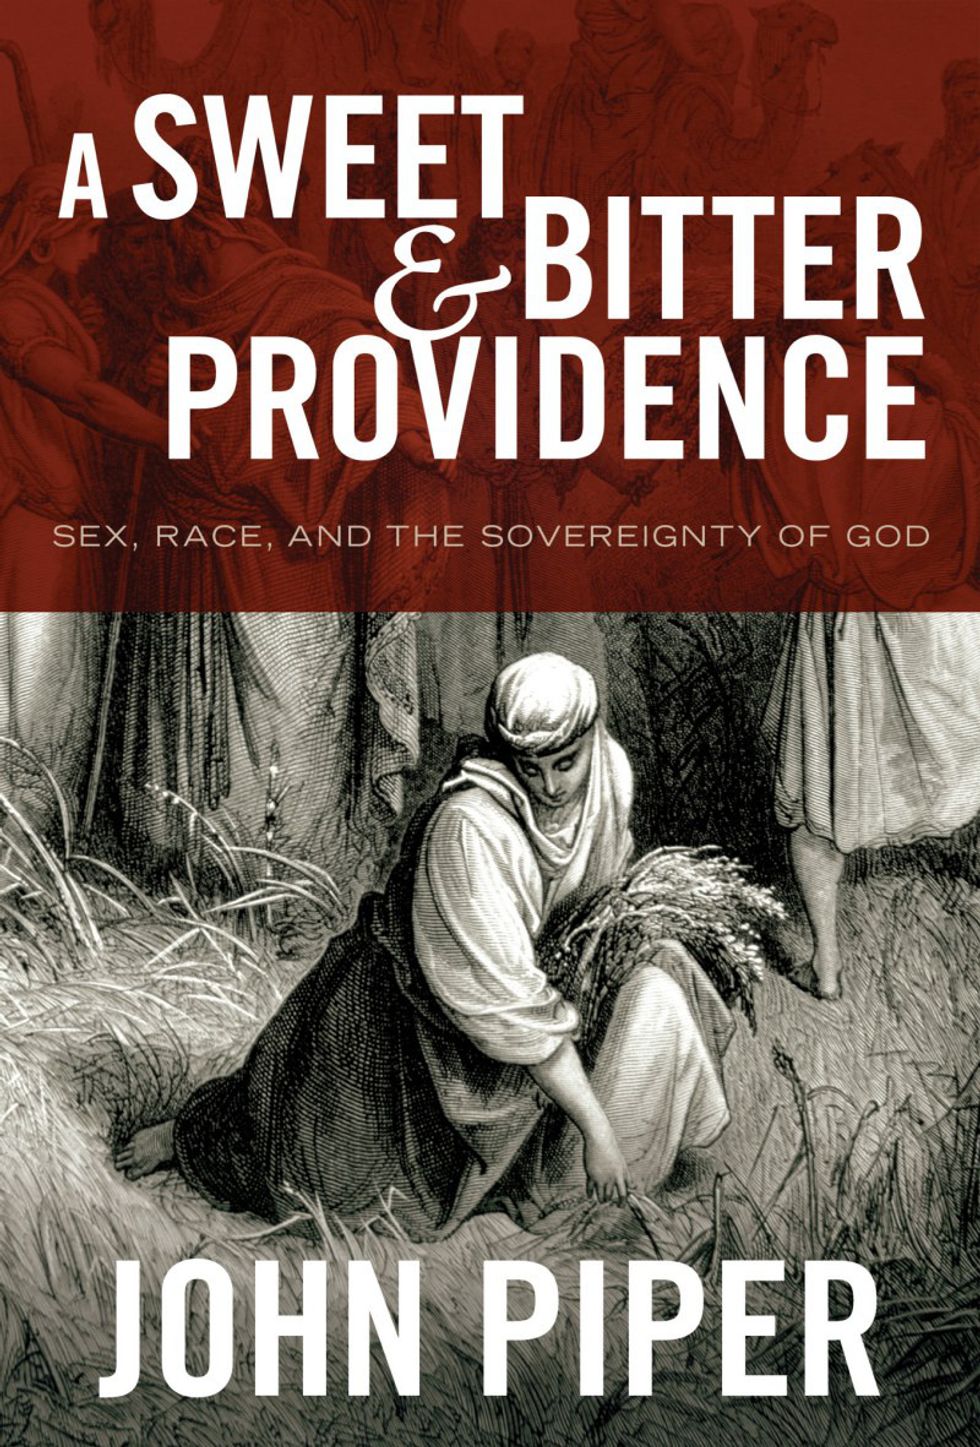 A Sweet & Bitter Providence by John Piper